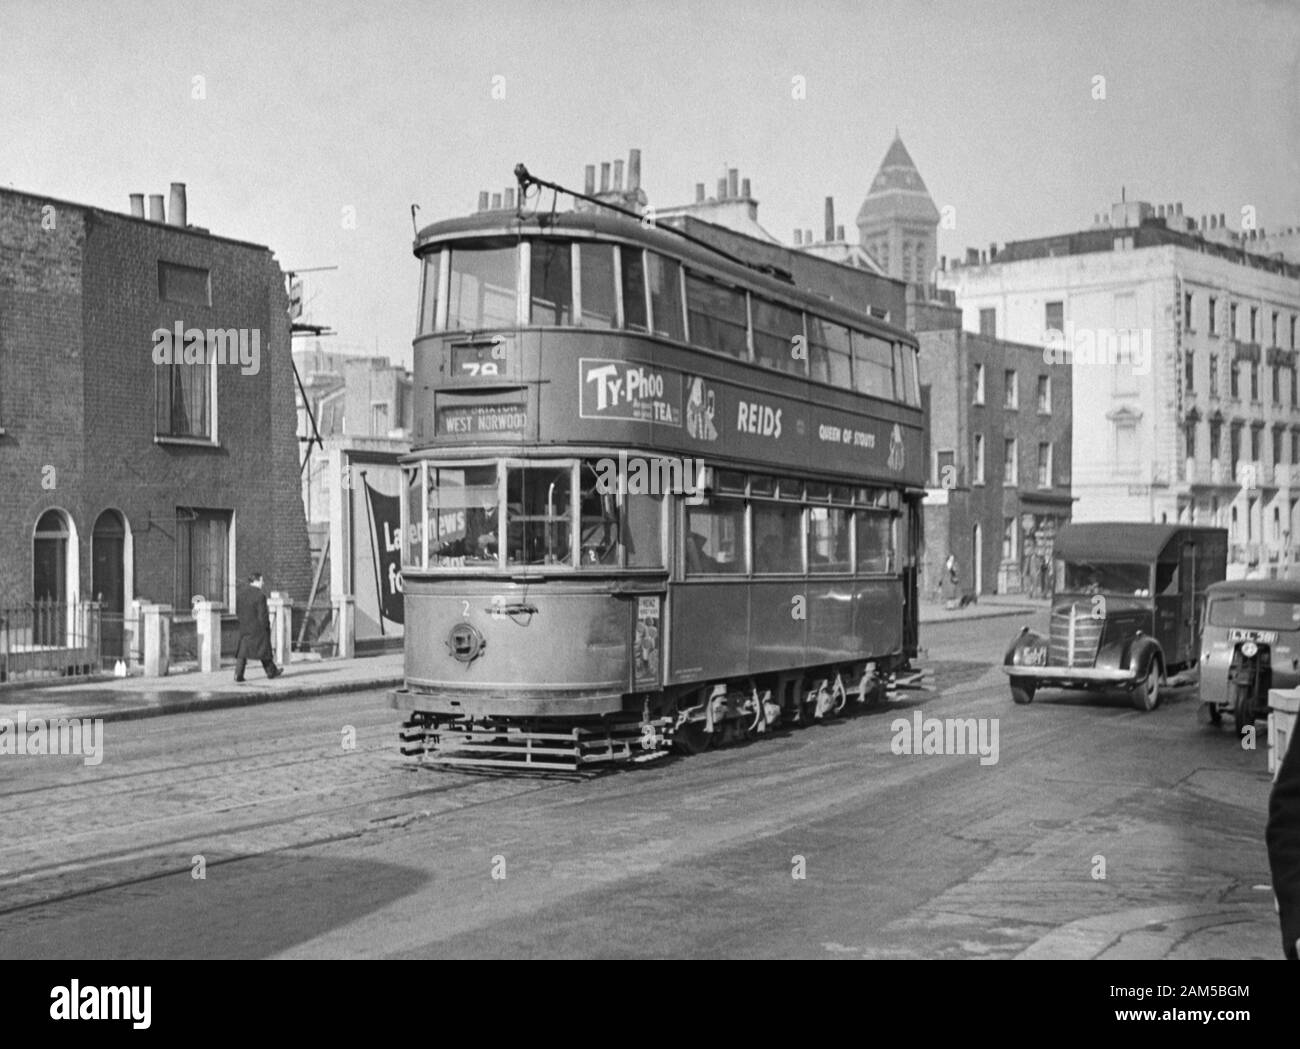 London Tram No 2, Class E1 On Route 78 To West Norwood, Circa late 1940s/early 1950s Stock Photo